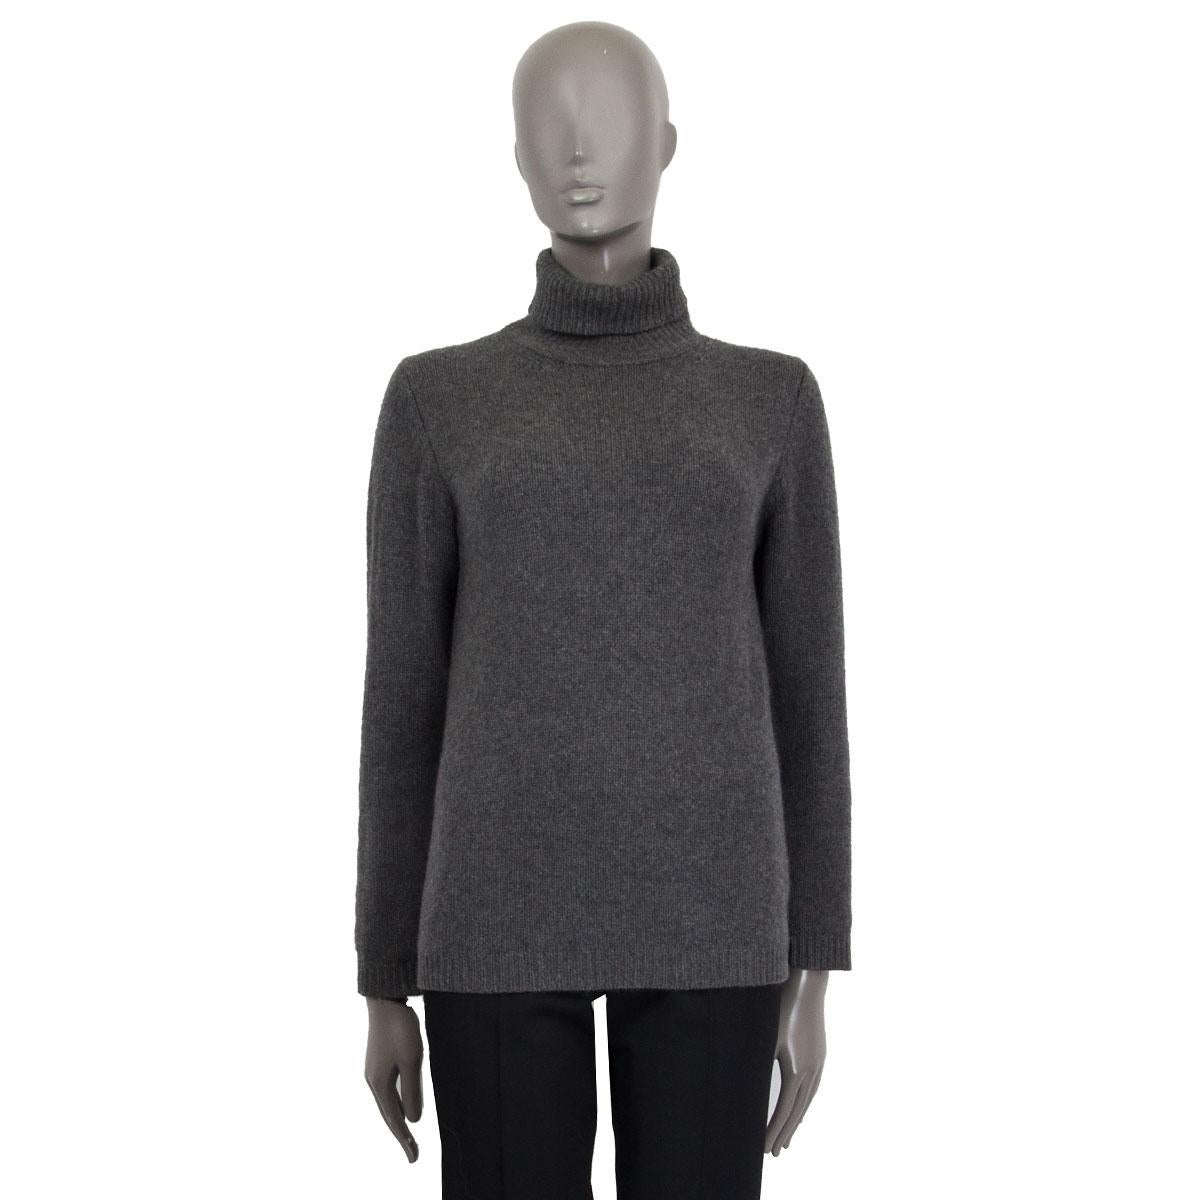 100% authentic Jil Sander turtleneck sweater in gray cashmere (100%). Has been worn and is in excellent condition.

Tag Size L
Size L
Shoulder Width 38cm (14.8in)
Bust 90cm (35.1in)
Waist 86cm (33.5in)
Hips 86cm (33.5in)
Length 64cm (25in)
Side Seam